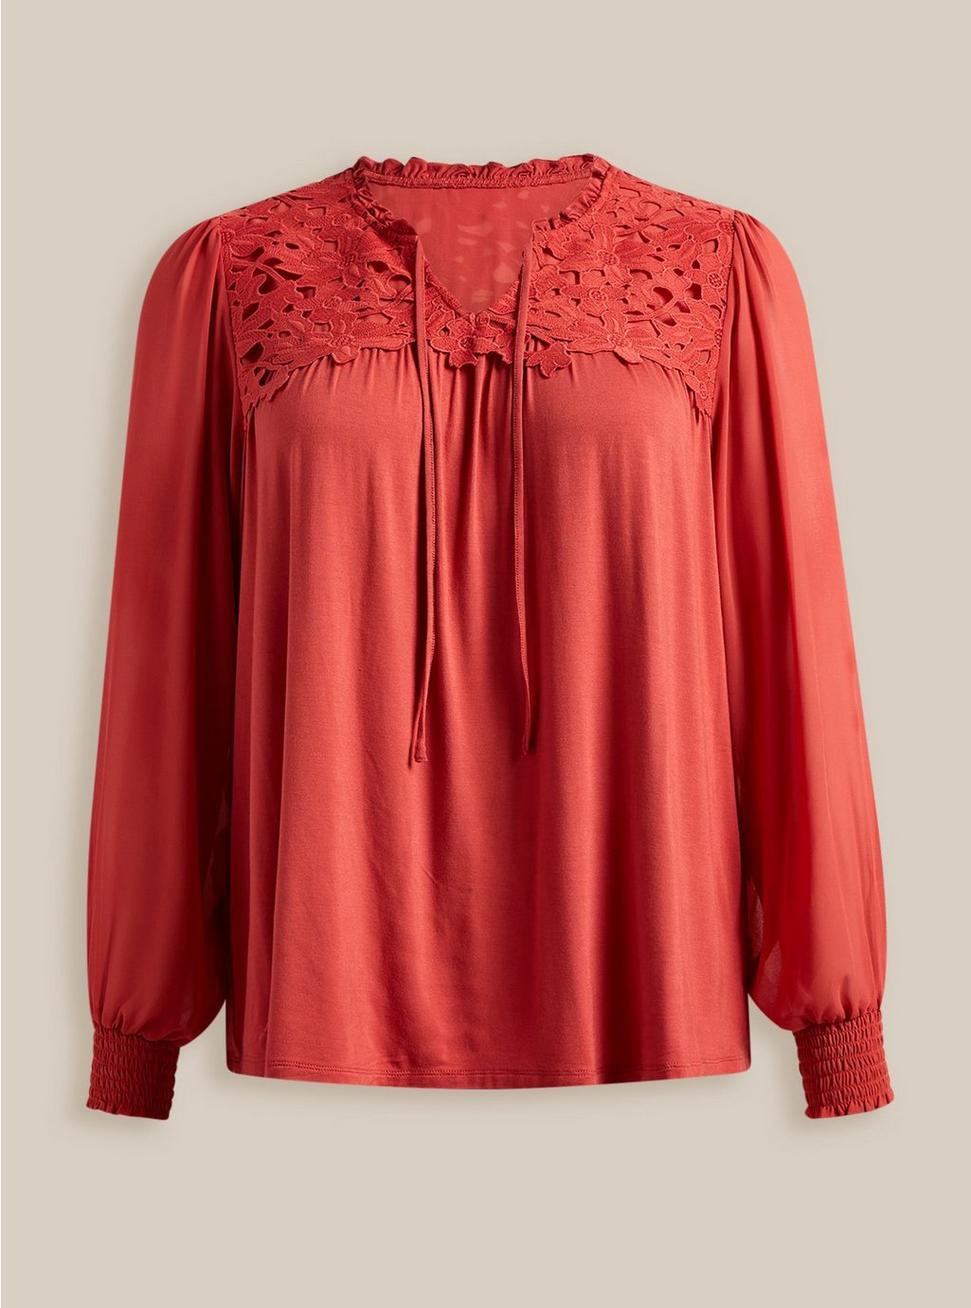 Super Soft Chiffon Sleeve Lace Inset Tie Detail Top , BAKED APPLE, hi-res